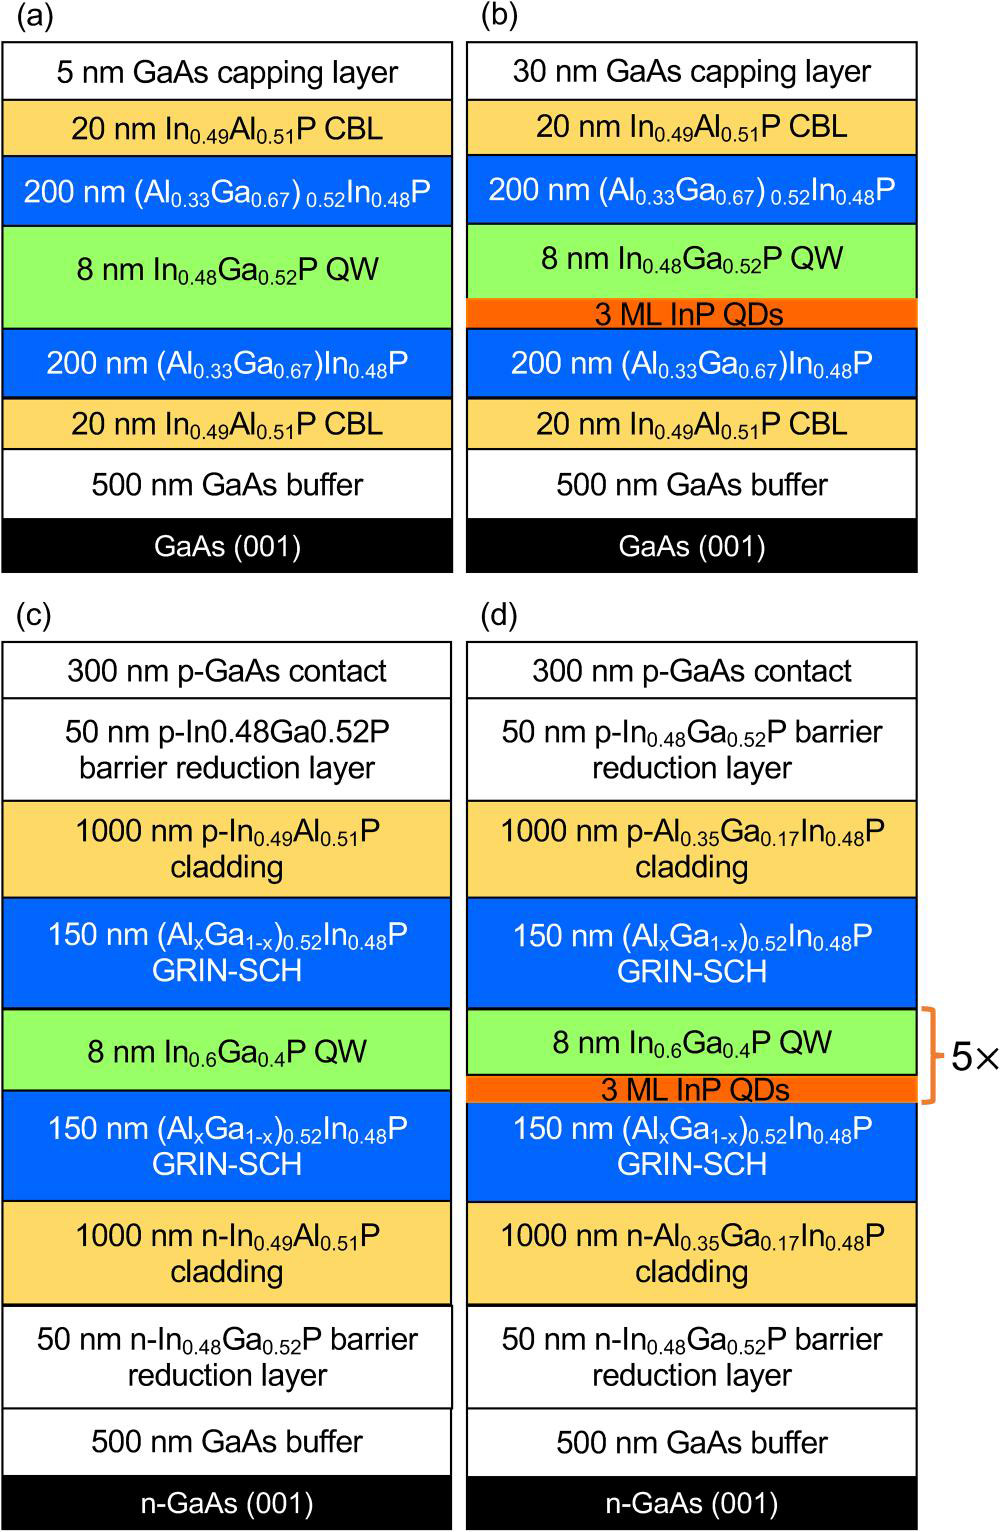 Figure 1: PL structure schematics for (a) In0.48Ga0.52P QW and (b) InP QDs grown on GaAs (001) substrates. Laser design for (c) In0.6Ga0.4P SQW and (d) InP MQD graded-index separate-confinement heterostructure (GRIN-SCH) lasers.